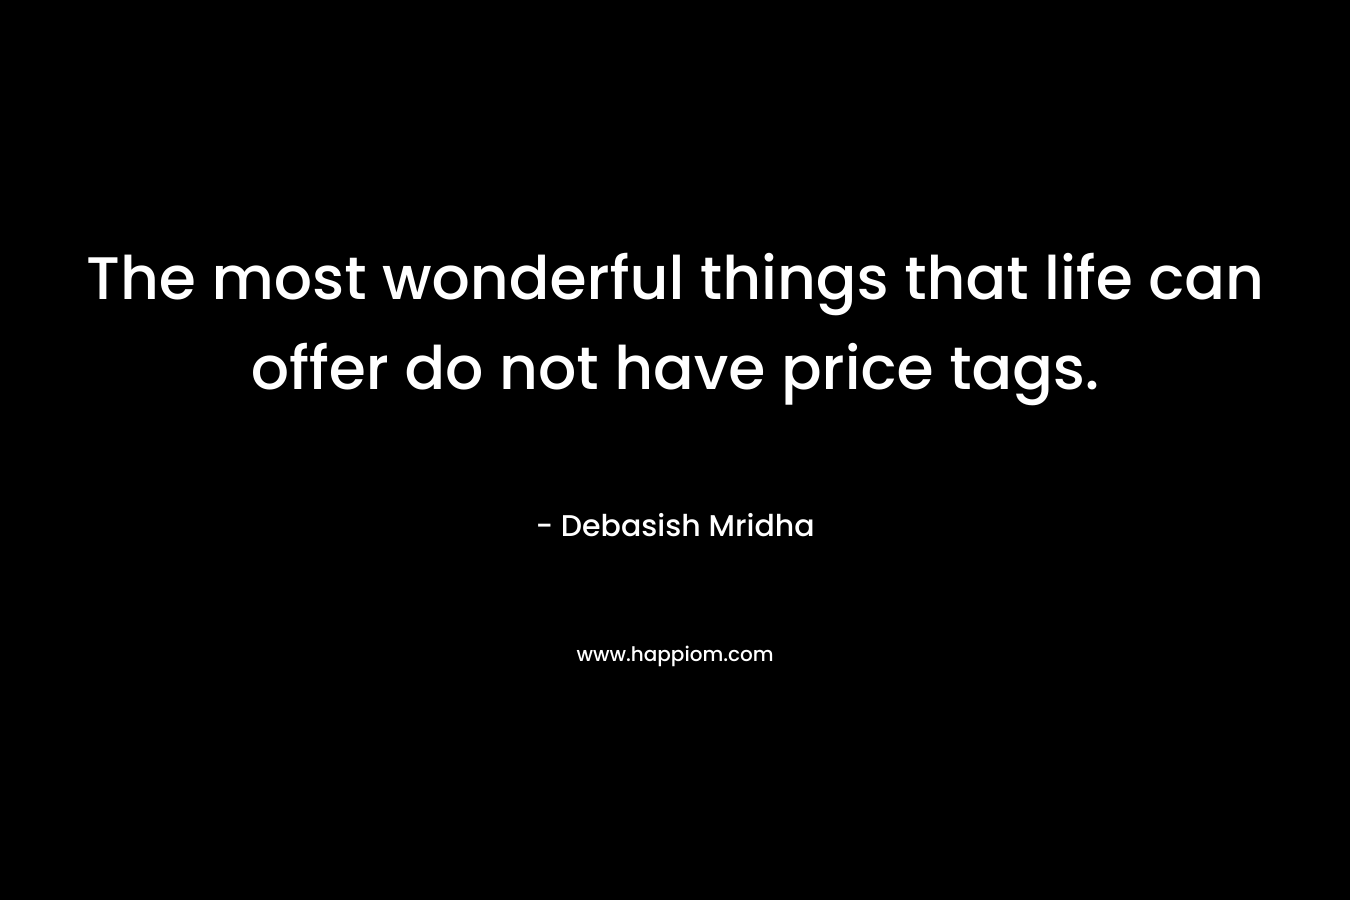 The most wonderful things that life can offer do not have price tags.